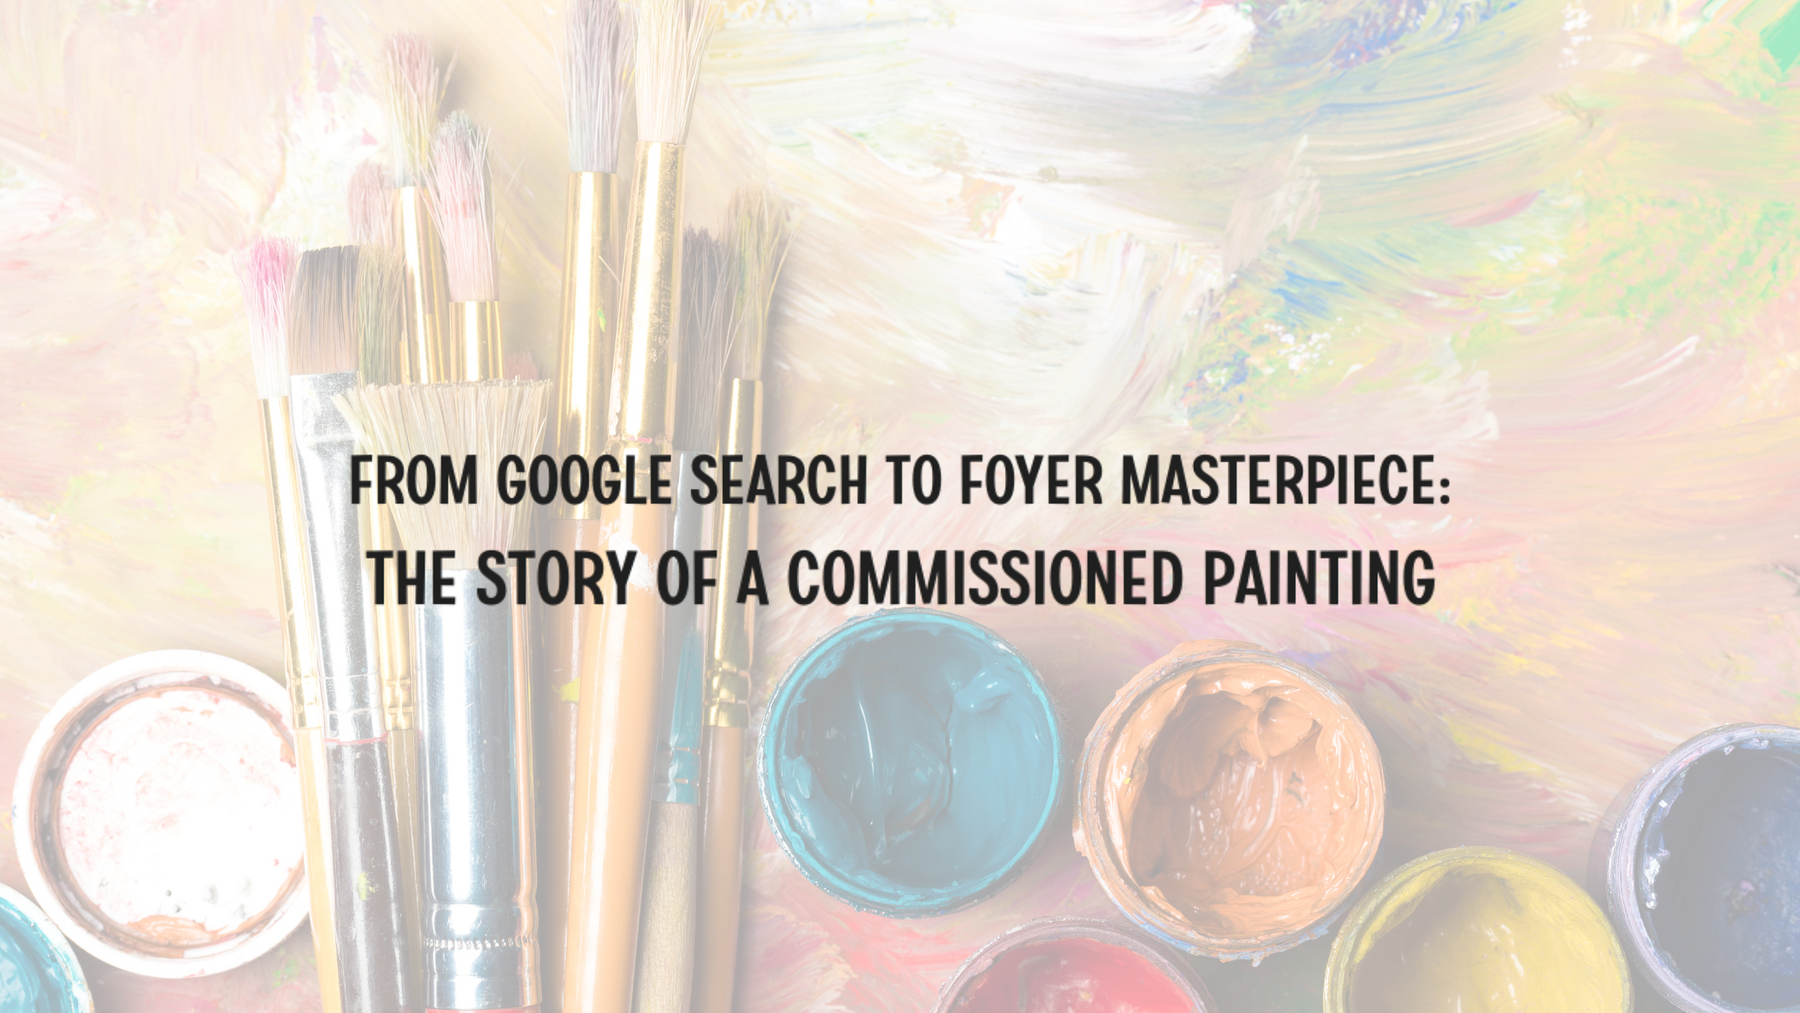 From Google Search to Foyer Masterpiece: The Story of a Commissioned Painting